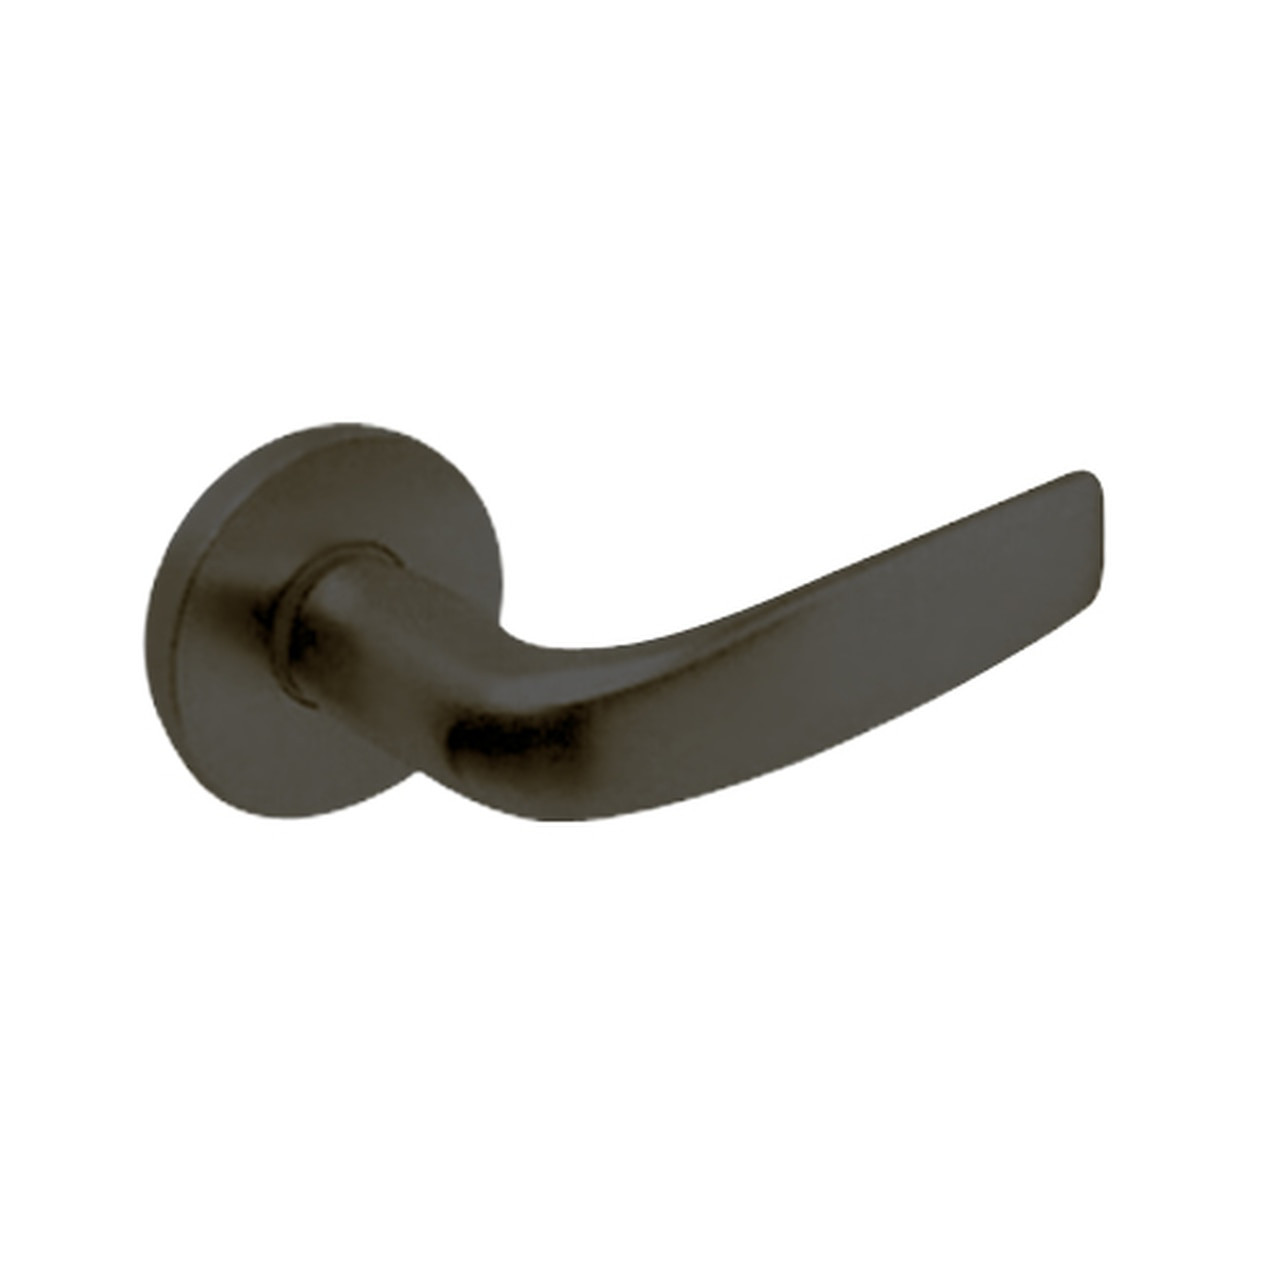 ML2032-CSB-613-LC Corbin Russwin ML2000 Series Mortise Institution Locksets with Citation Lever in Oil Rubbed Bronze